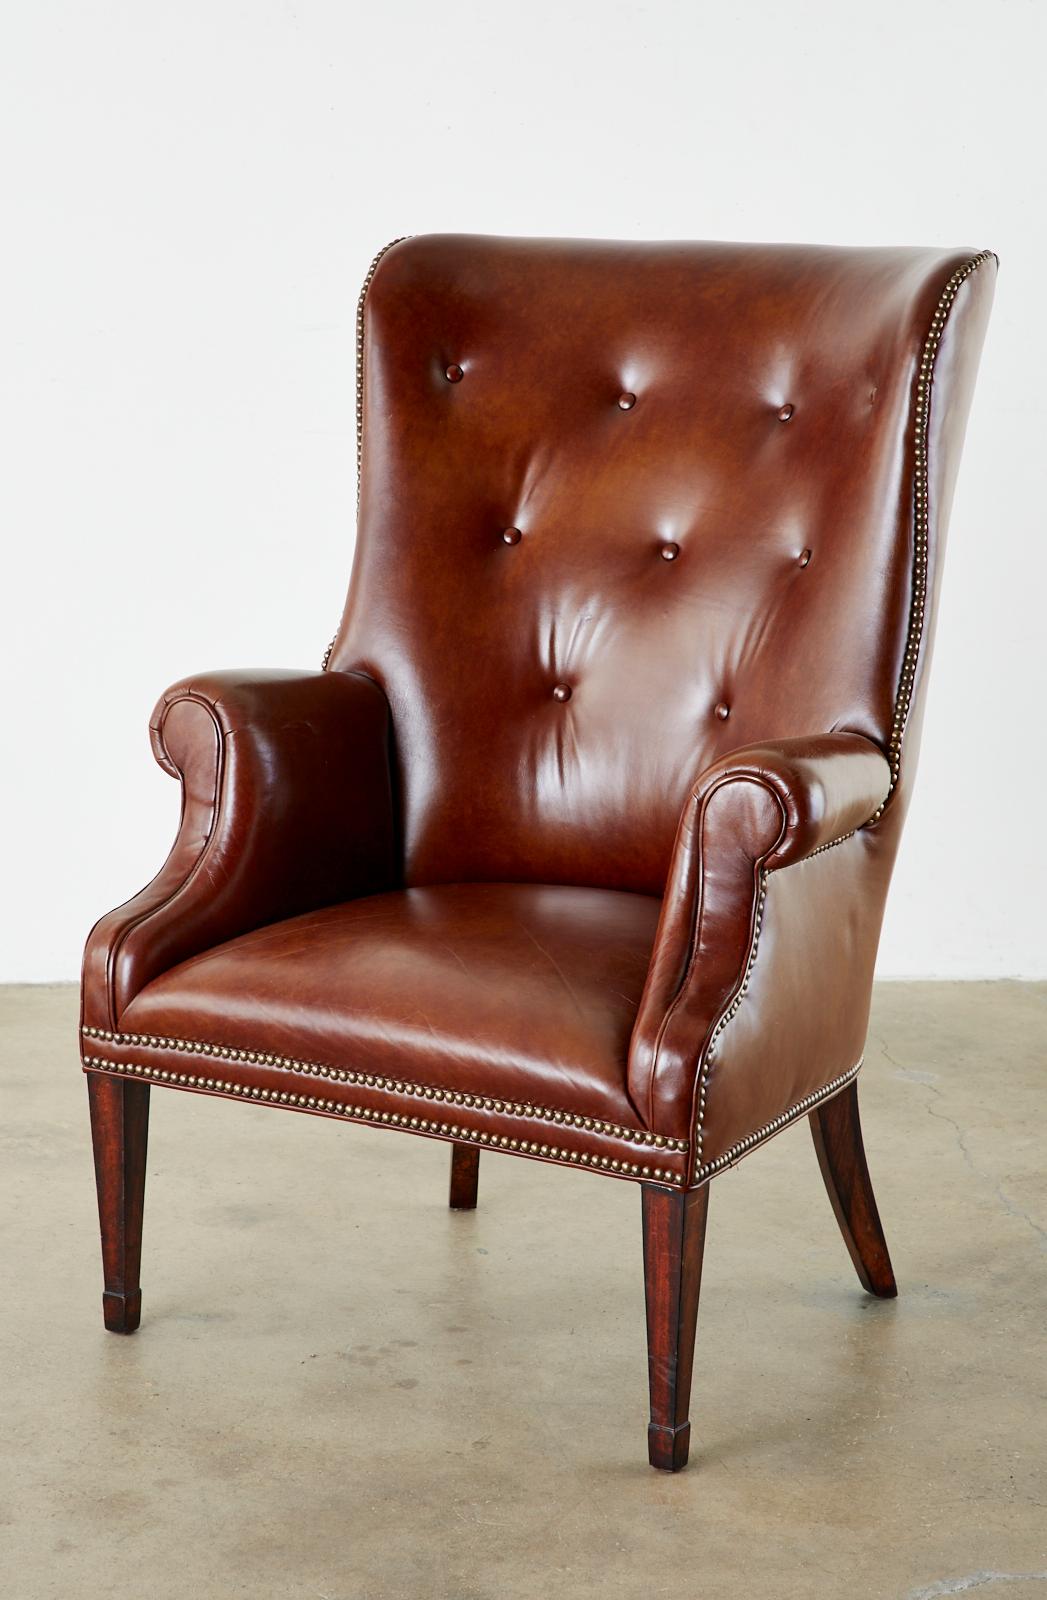 American English Georgian Style Cognac Tufted Leather Wingback Chair